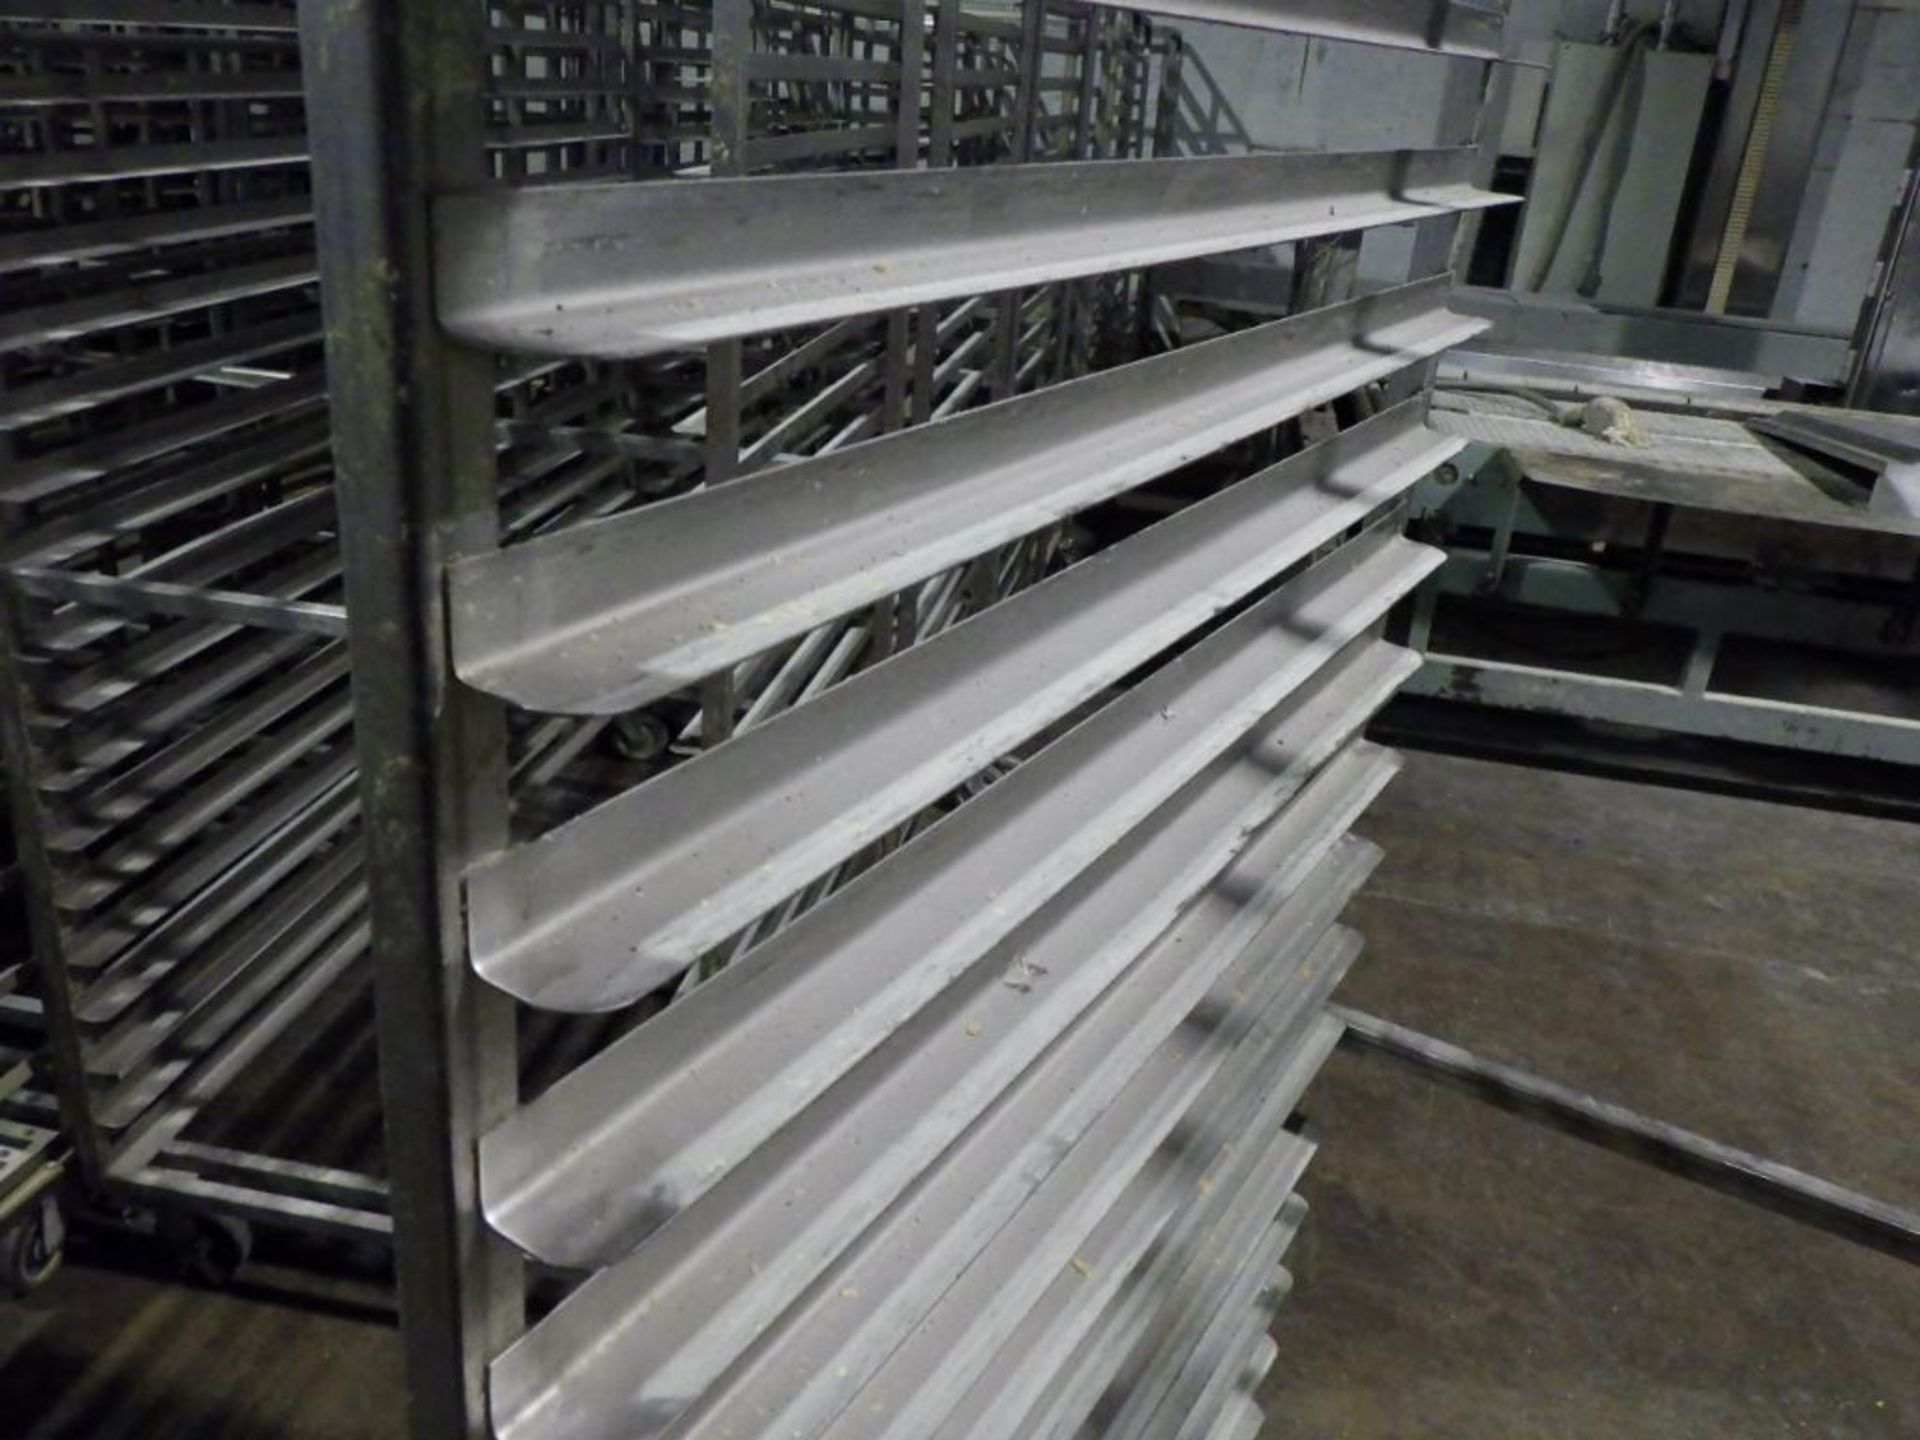 SS double bakery rack - Image 5 of 7